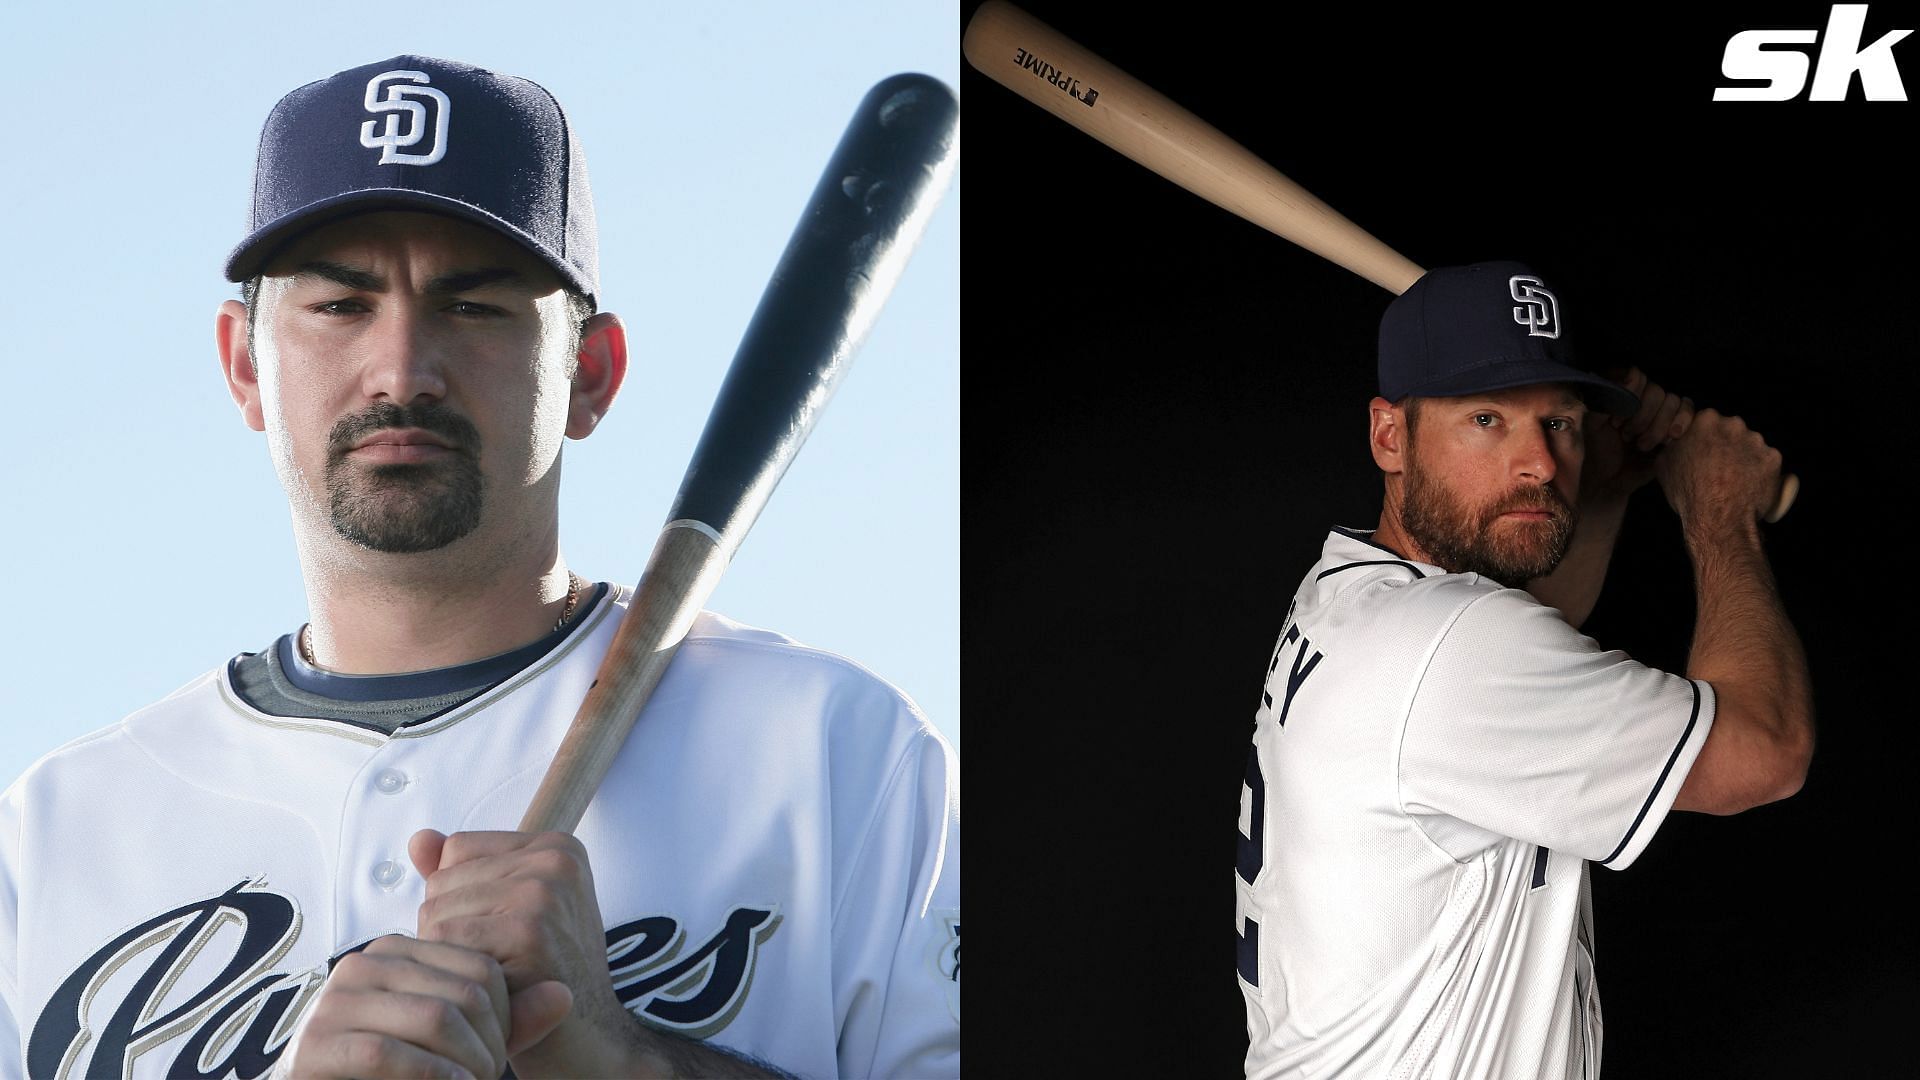 Ken Caminiti Was Driving Force Behind 1996 and 1998 Padres